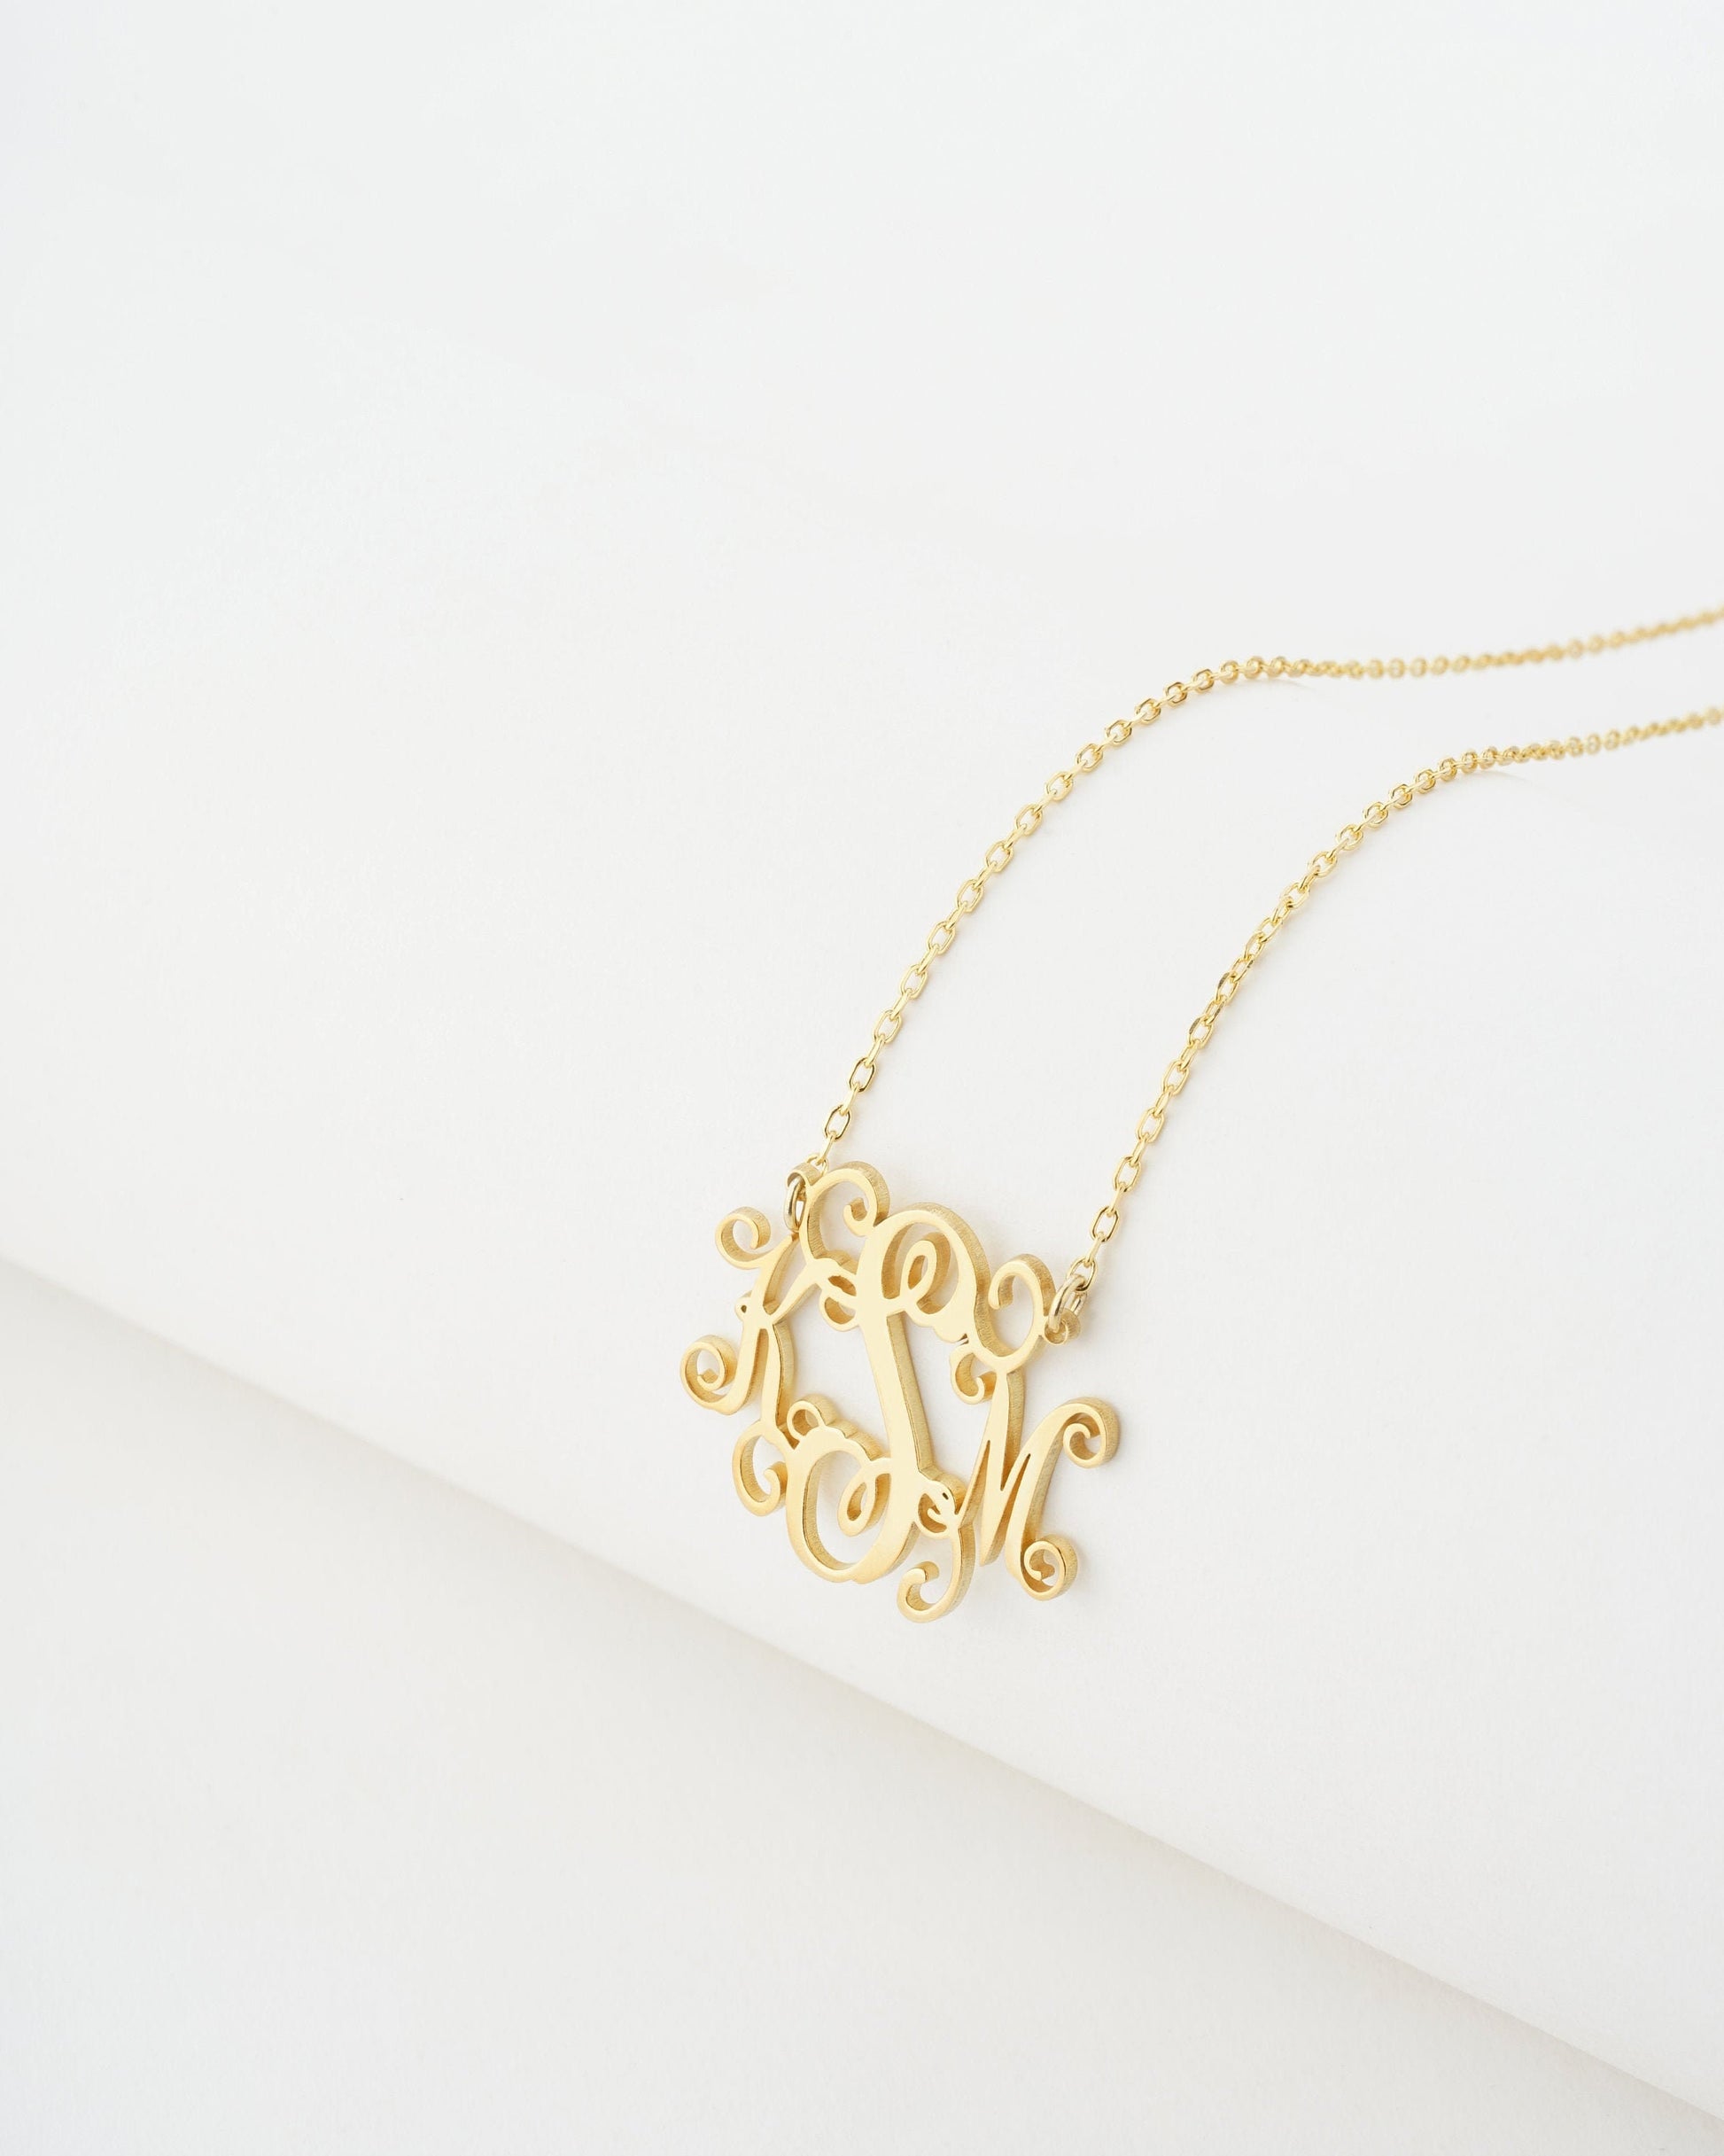 Custom Monogram Necklace | Name Initials Necklace | Monogrammed Necklace | Monogram Earrings | Children Name Necklace | Gift for mom